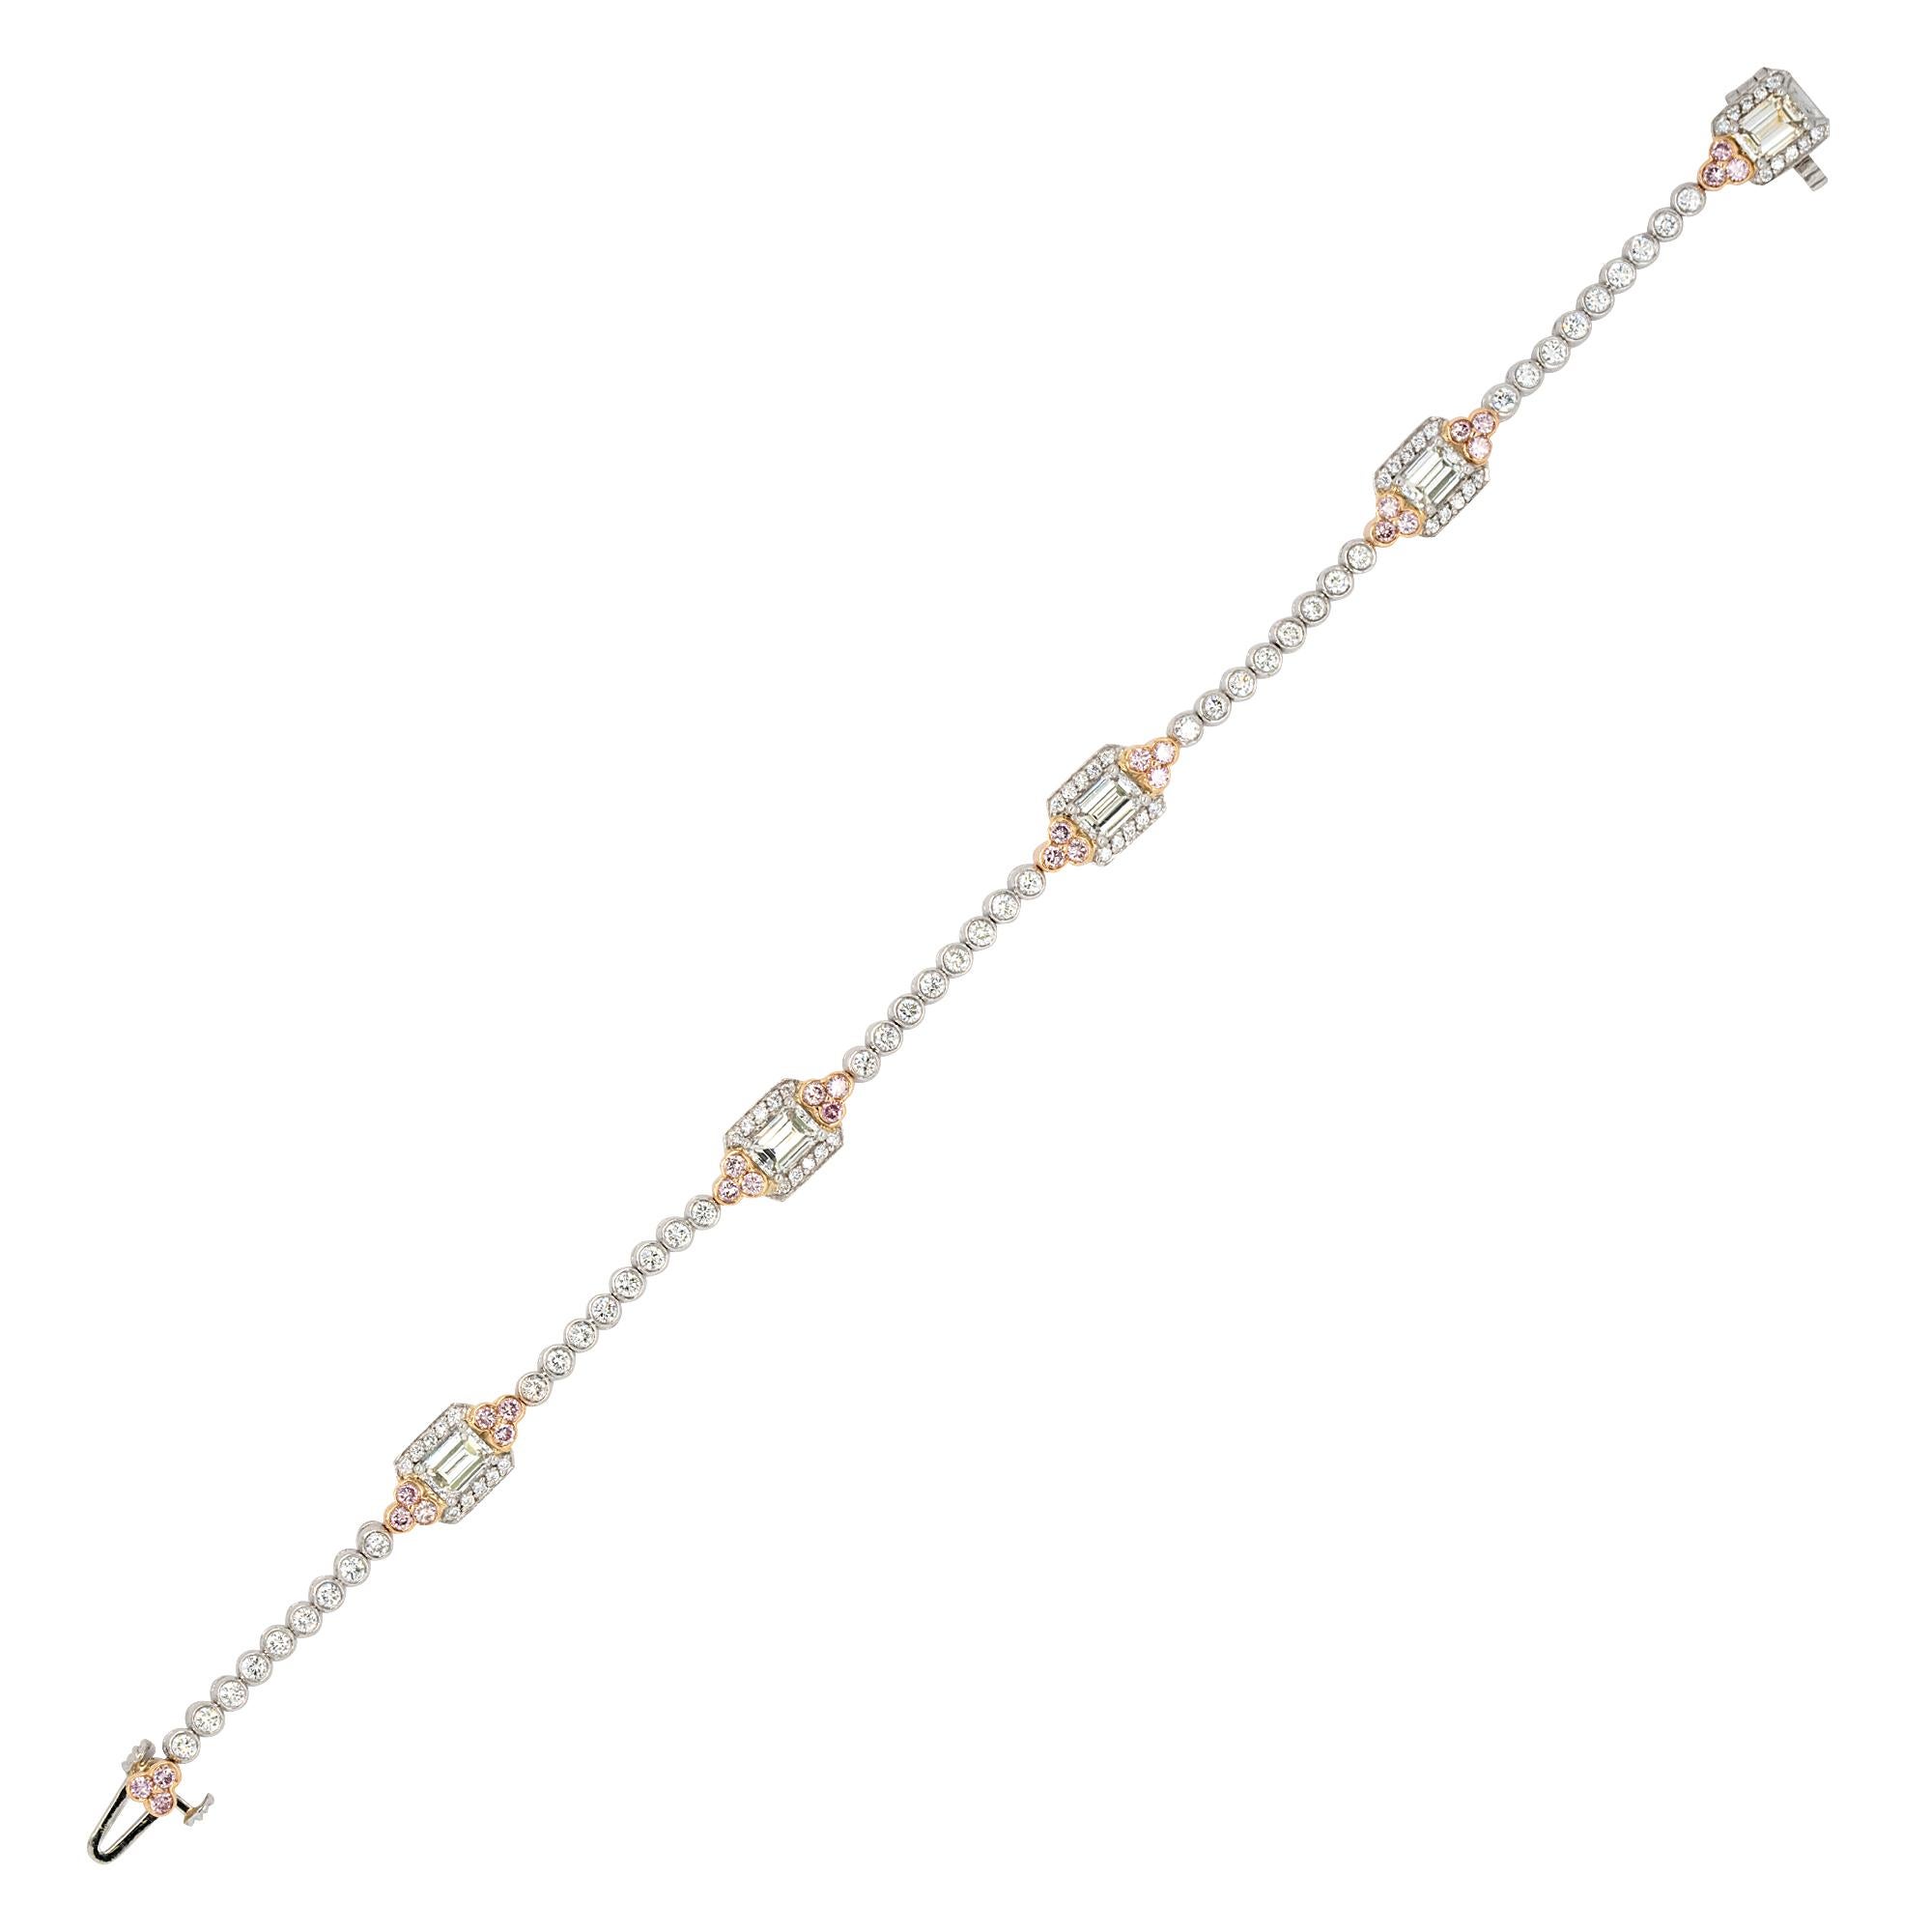 Material: 18k white gold
Diamonds Details: 1.97ctw of Natural G color and VS clarity Emerald cuts
1.26ctw of Natural Round Brilliants G color and VS clarity
0.55ctw of Natural Fancy Pink Round Brilliants.
Bracelet Measurements	7